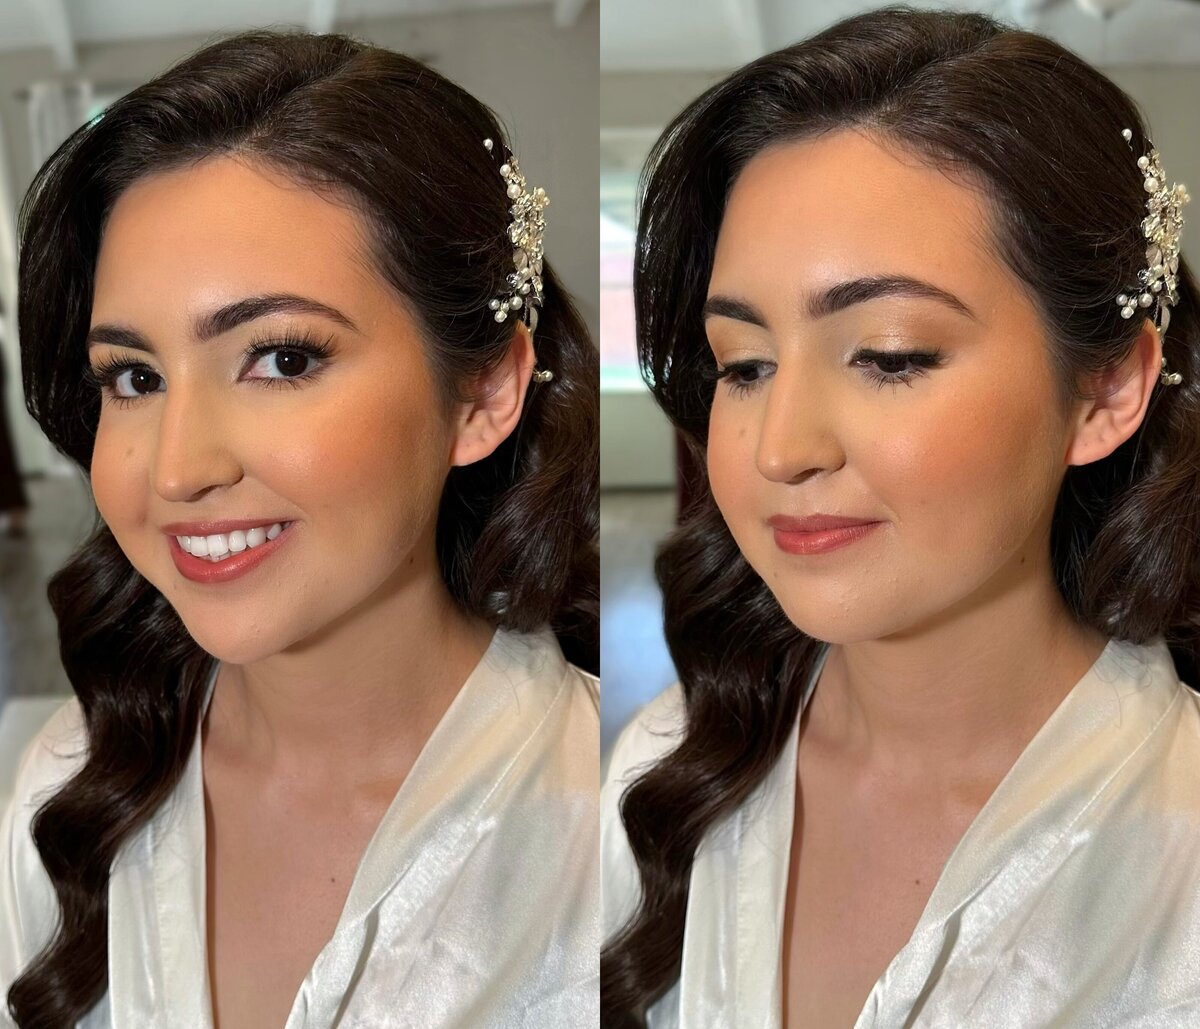 Lilly Bridal Artistry - Wedding Hair and Makeup Artists - Behind the Scenes 13